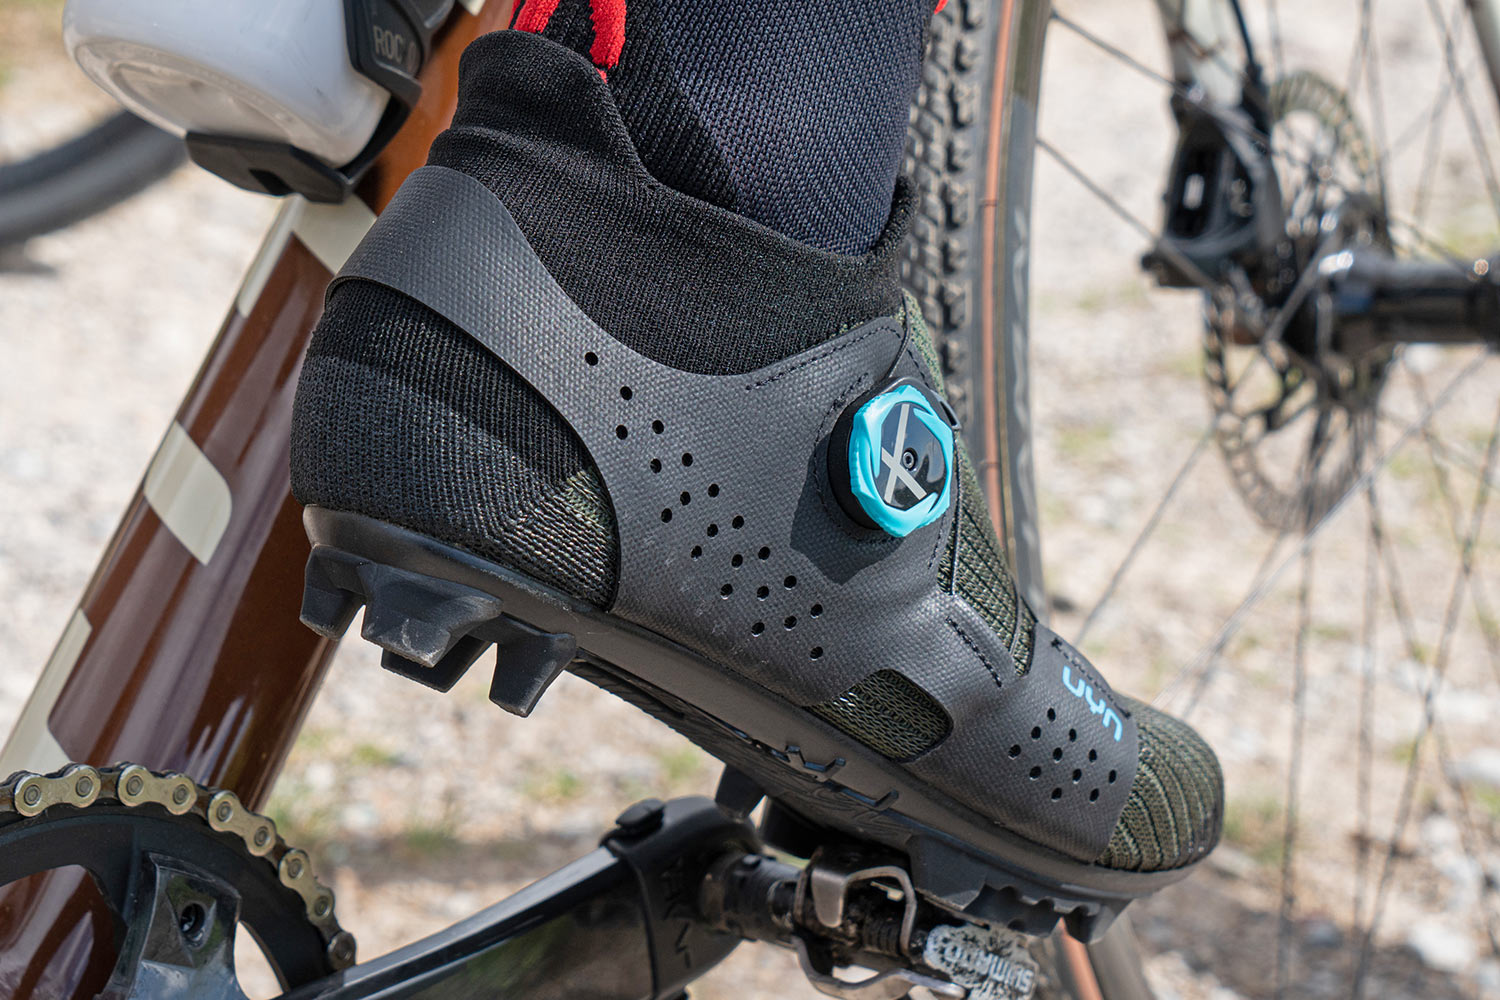 UYN Naked MTB shoes, natural fiber recycled sock-like breathable knit off-road cycling shoe, photo by Mattia Ragni, angled rear